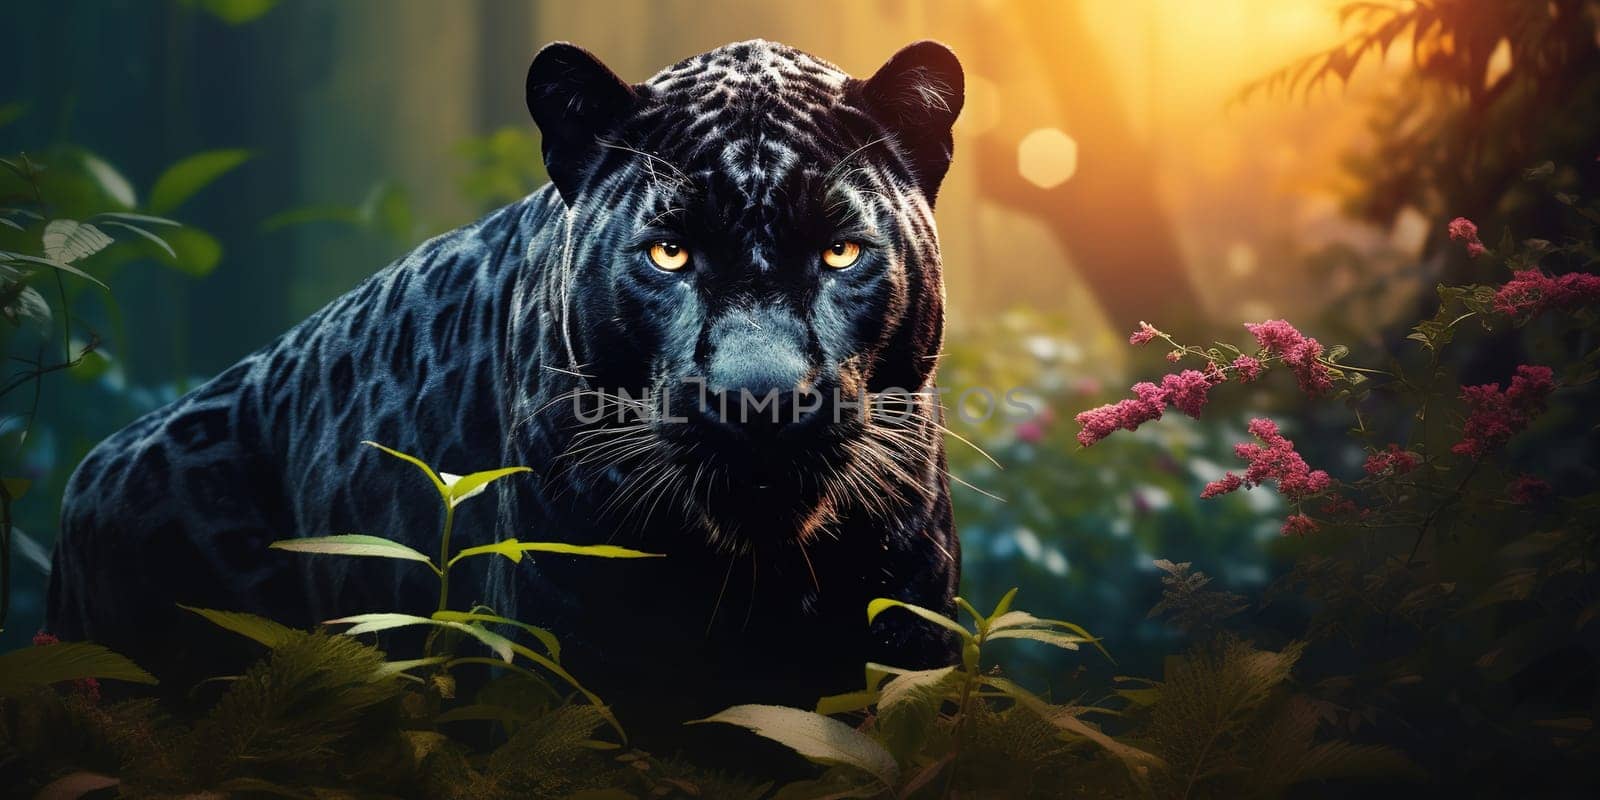 Black panther with black fur rather than the typical spotted coatin a nature, wildlife concept by Kadula